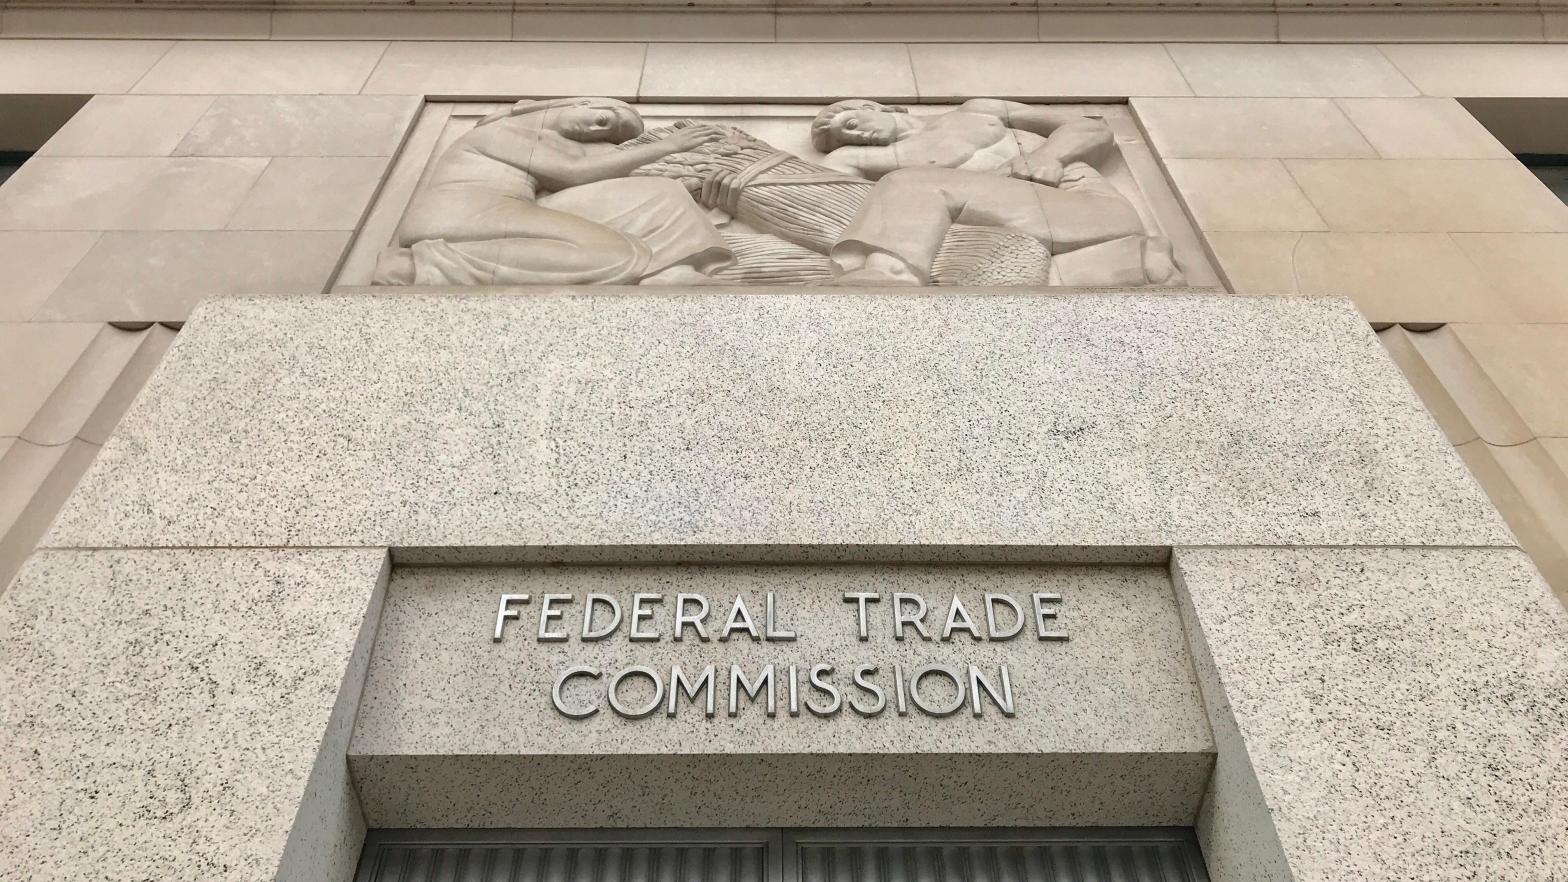 Federal Trade Commission headquarters in Washington D.C. (Image: DCStockPhotography, Shutterstock)